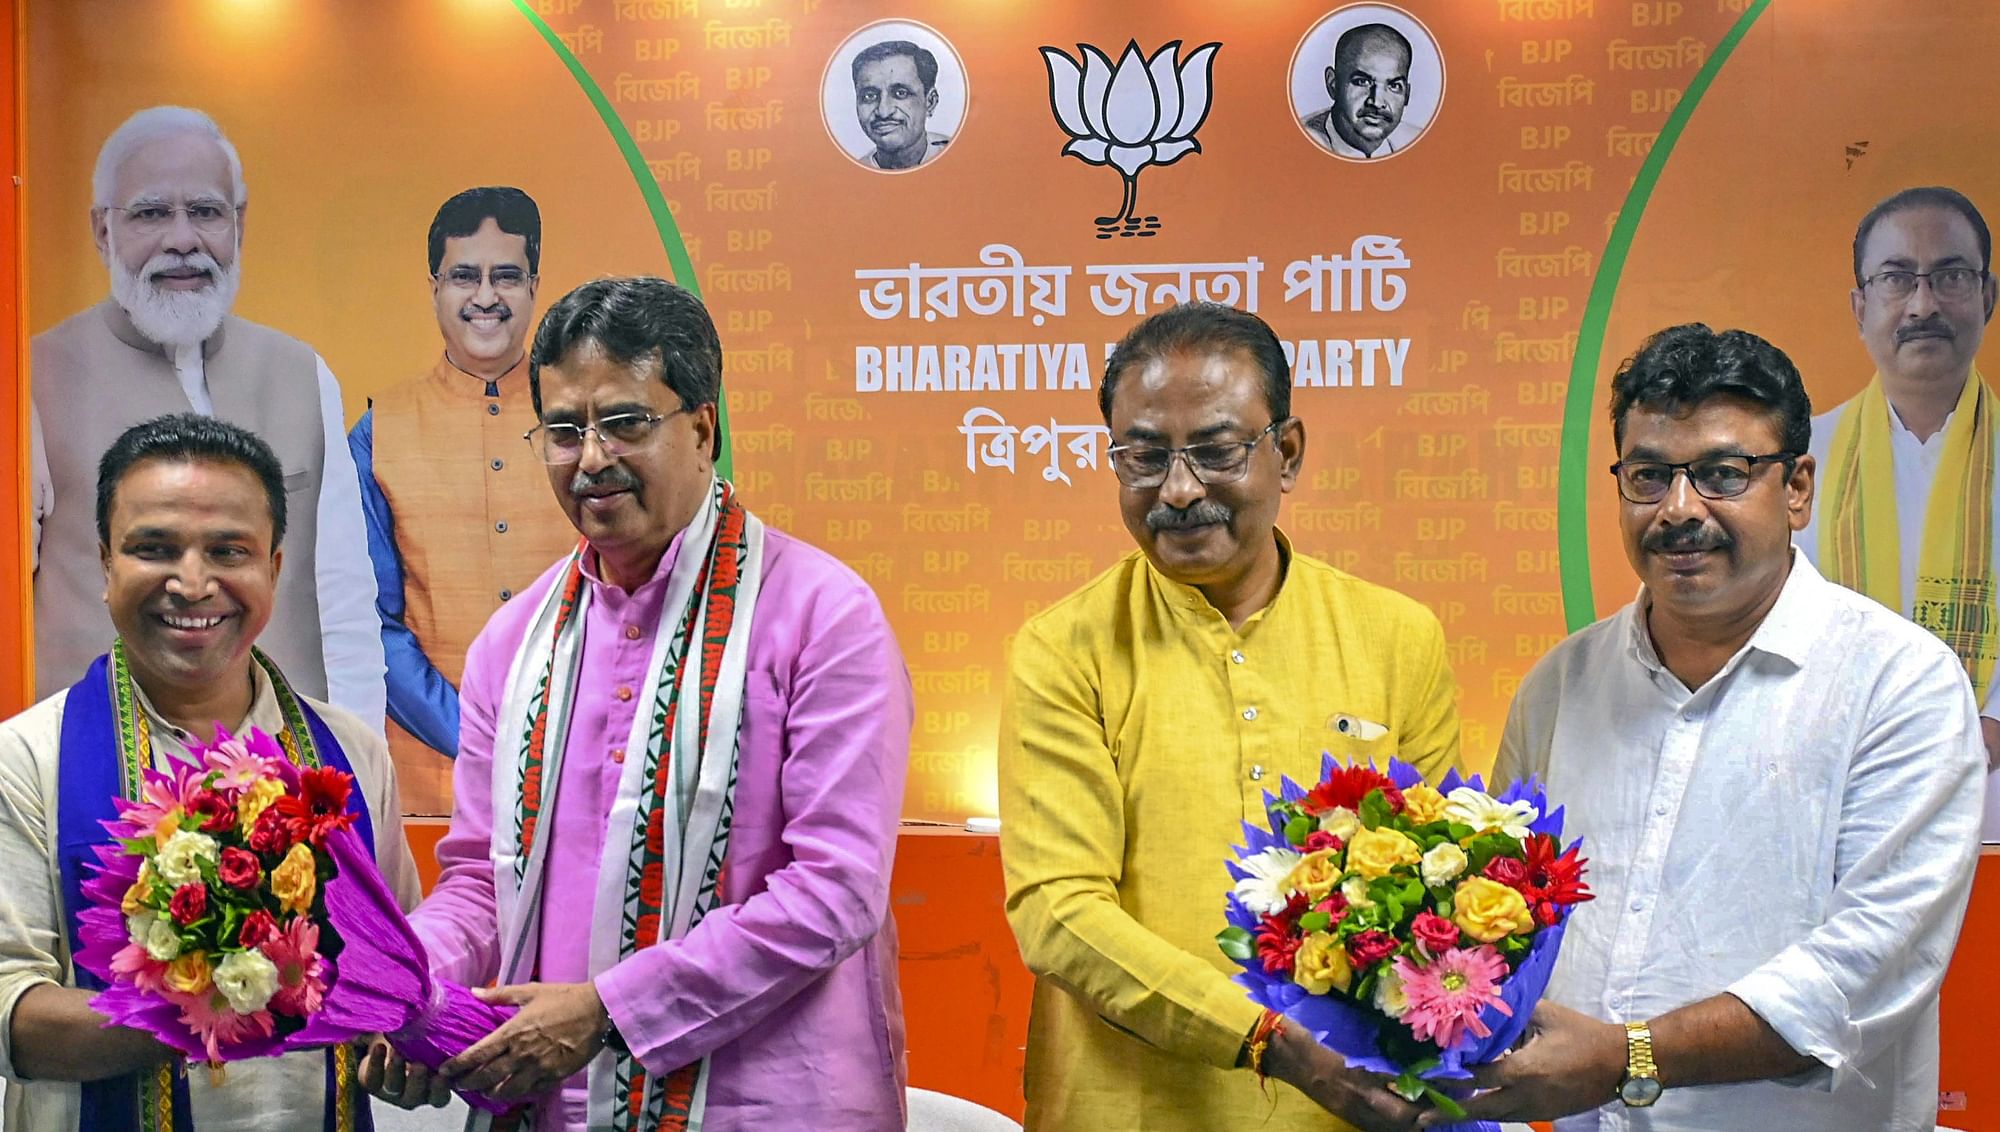 <div class="paragraphs"><p>Agartala: Tripura Chief Minister Manik Saha with BJP Tripura President Rajib Bhattacharjee and newly elected party MLAs Taffajal Hossain and Bindu Debnath during a press conference after the party's victory in the by-elections to Boxanagar and Dhanpur assembly seats, in Agartala, Friday, Sept. 8, 2023. </p></div>